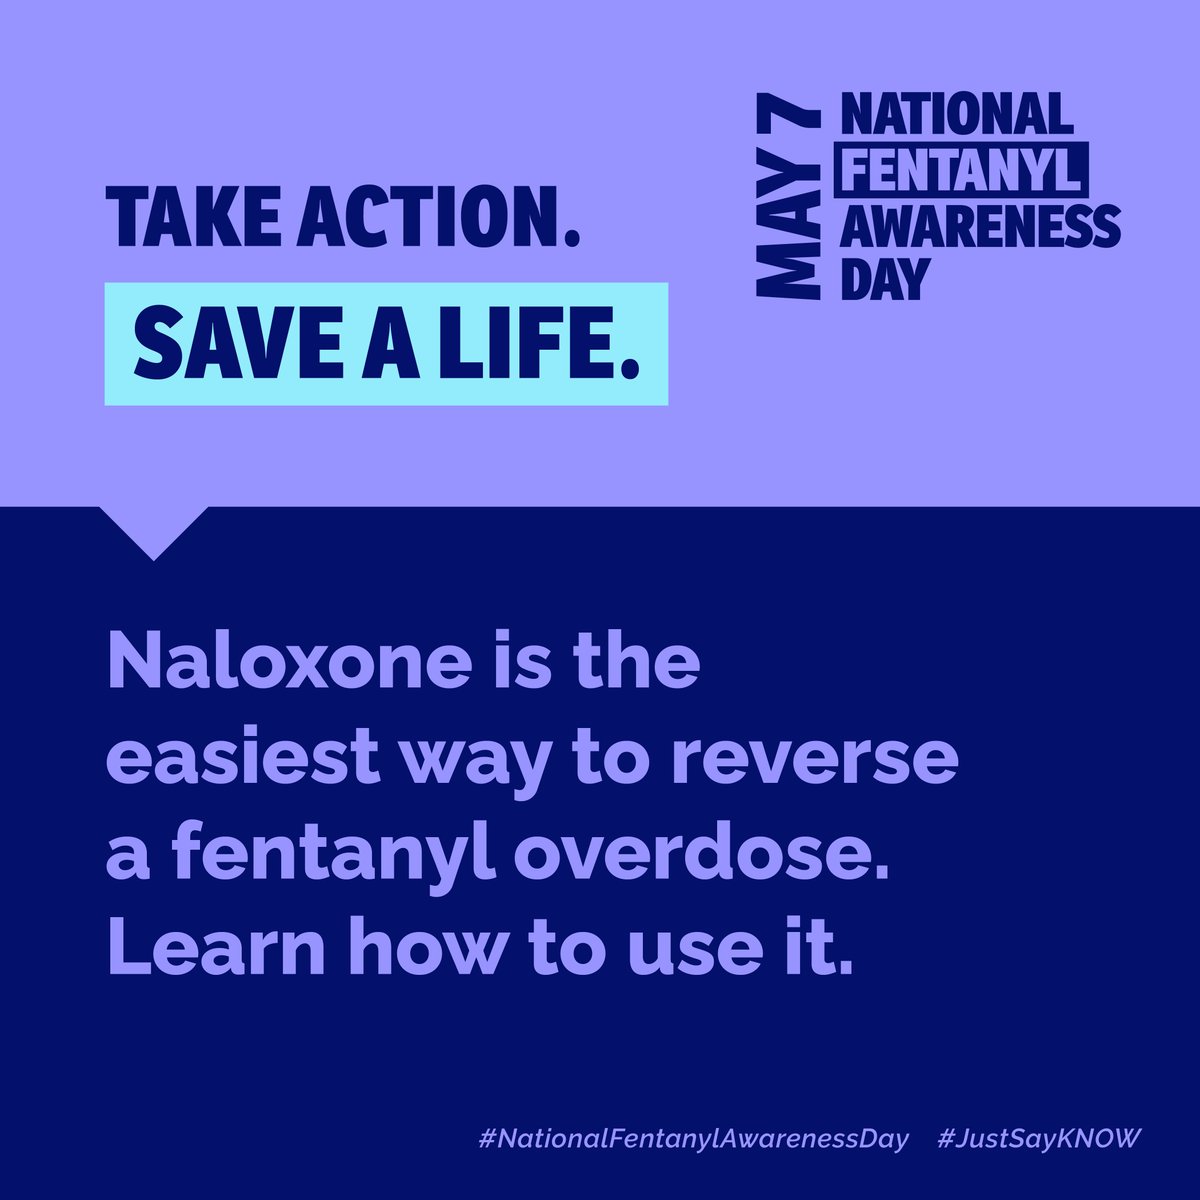 Today is #NationalFentanylAwarenessDay. #Naloxone is an opioid overdose reversal medication. Receive training and order your FREE naloxone anywhere in Texas at NaloxoneTexas.org. One dose could save a life. #OverdoseAwareness